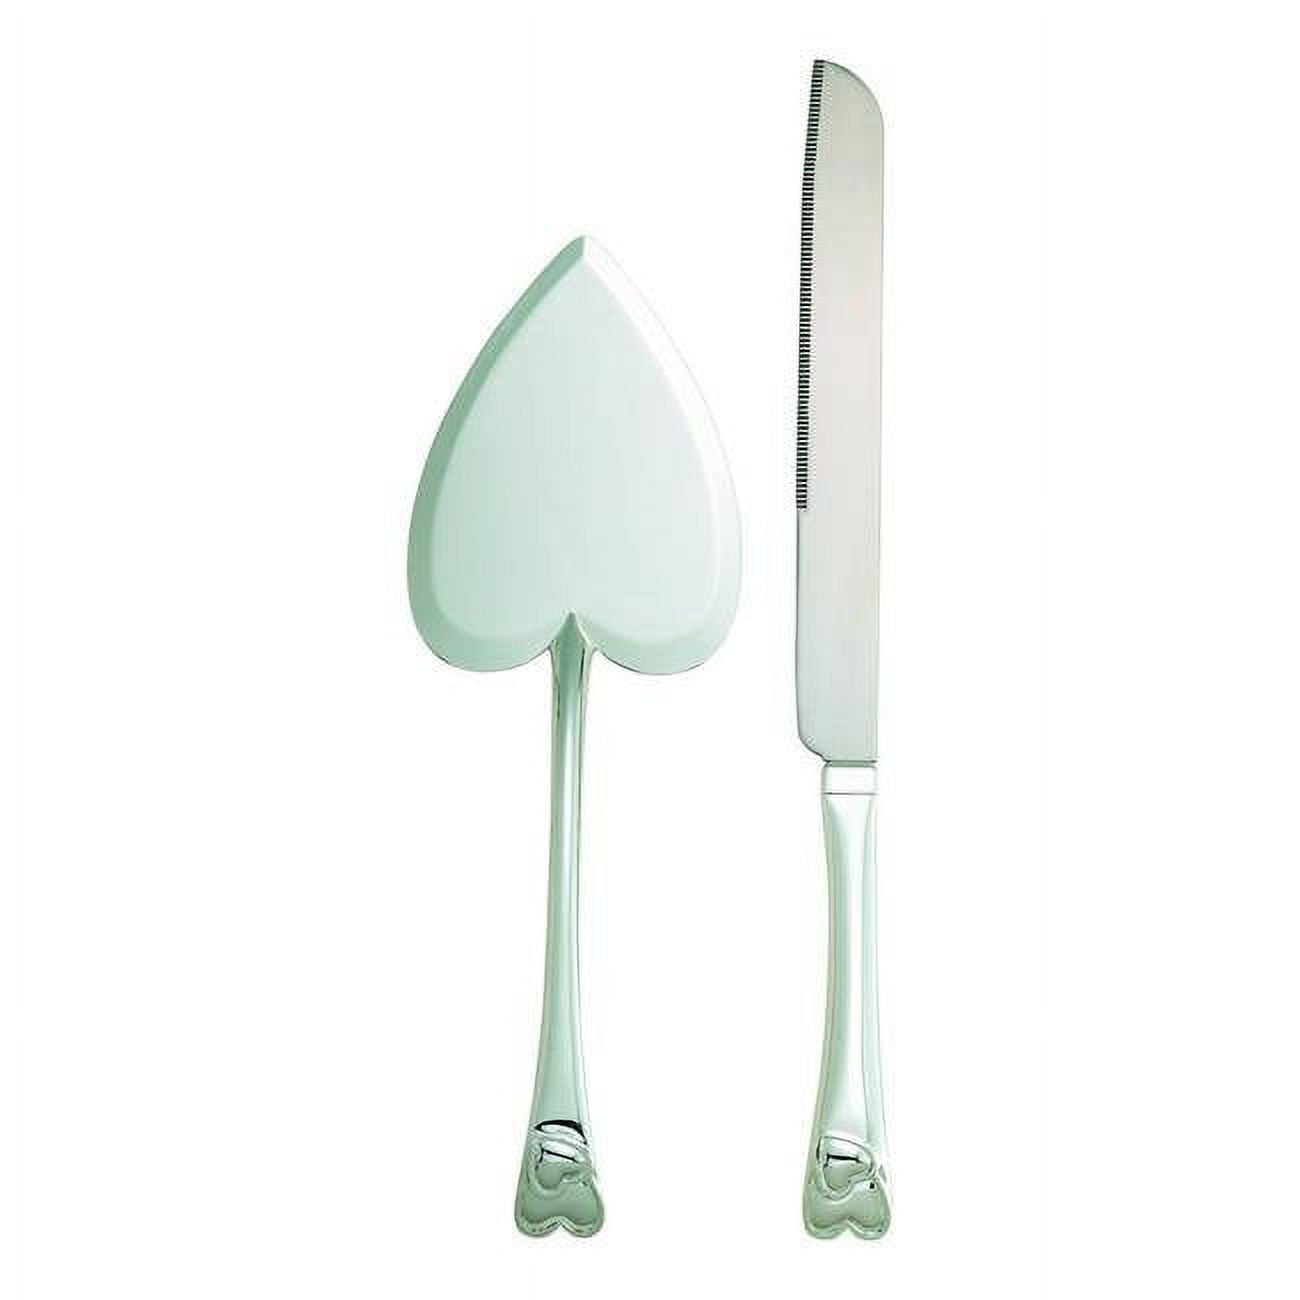 Picture of Creative Gifts International 025593 Heart Handle Cake Knife & Server Set - Nickel Plated